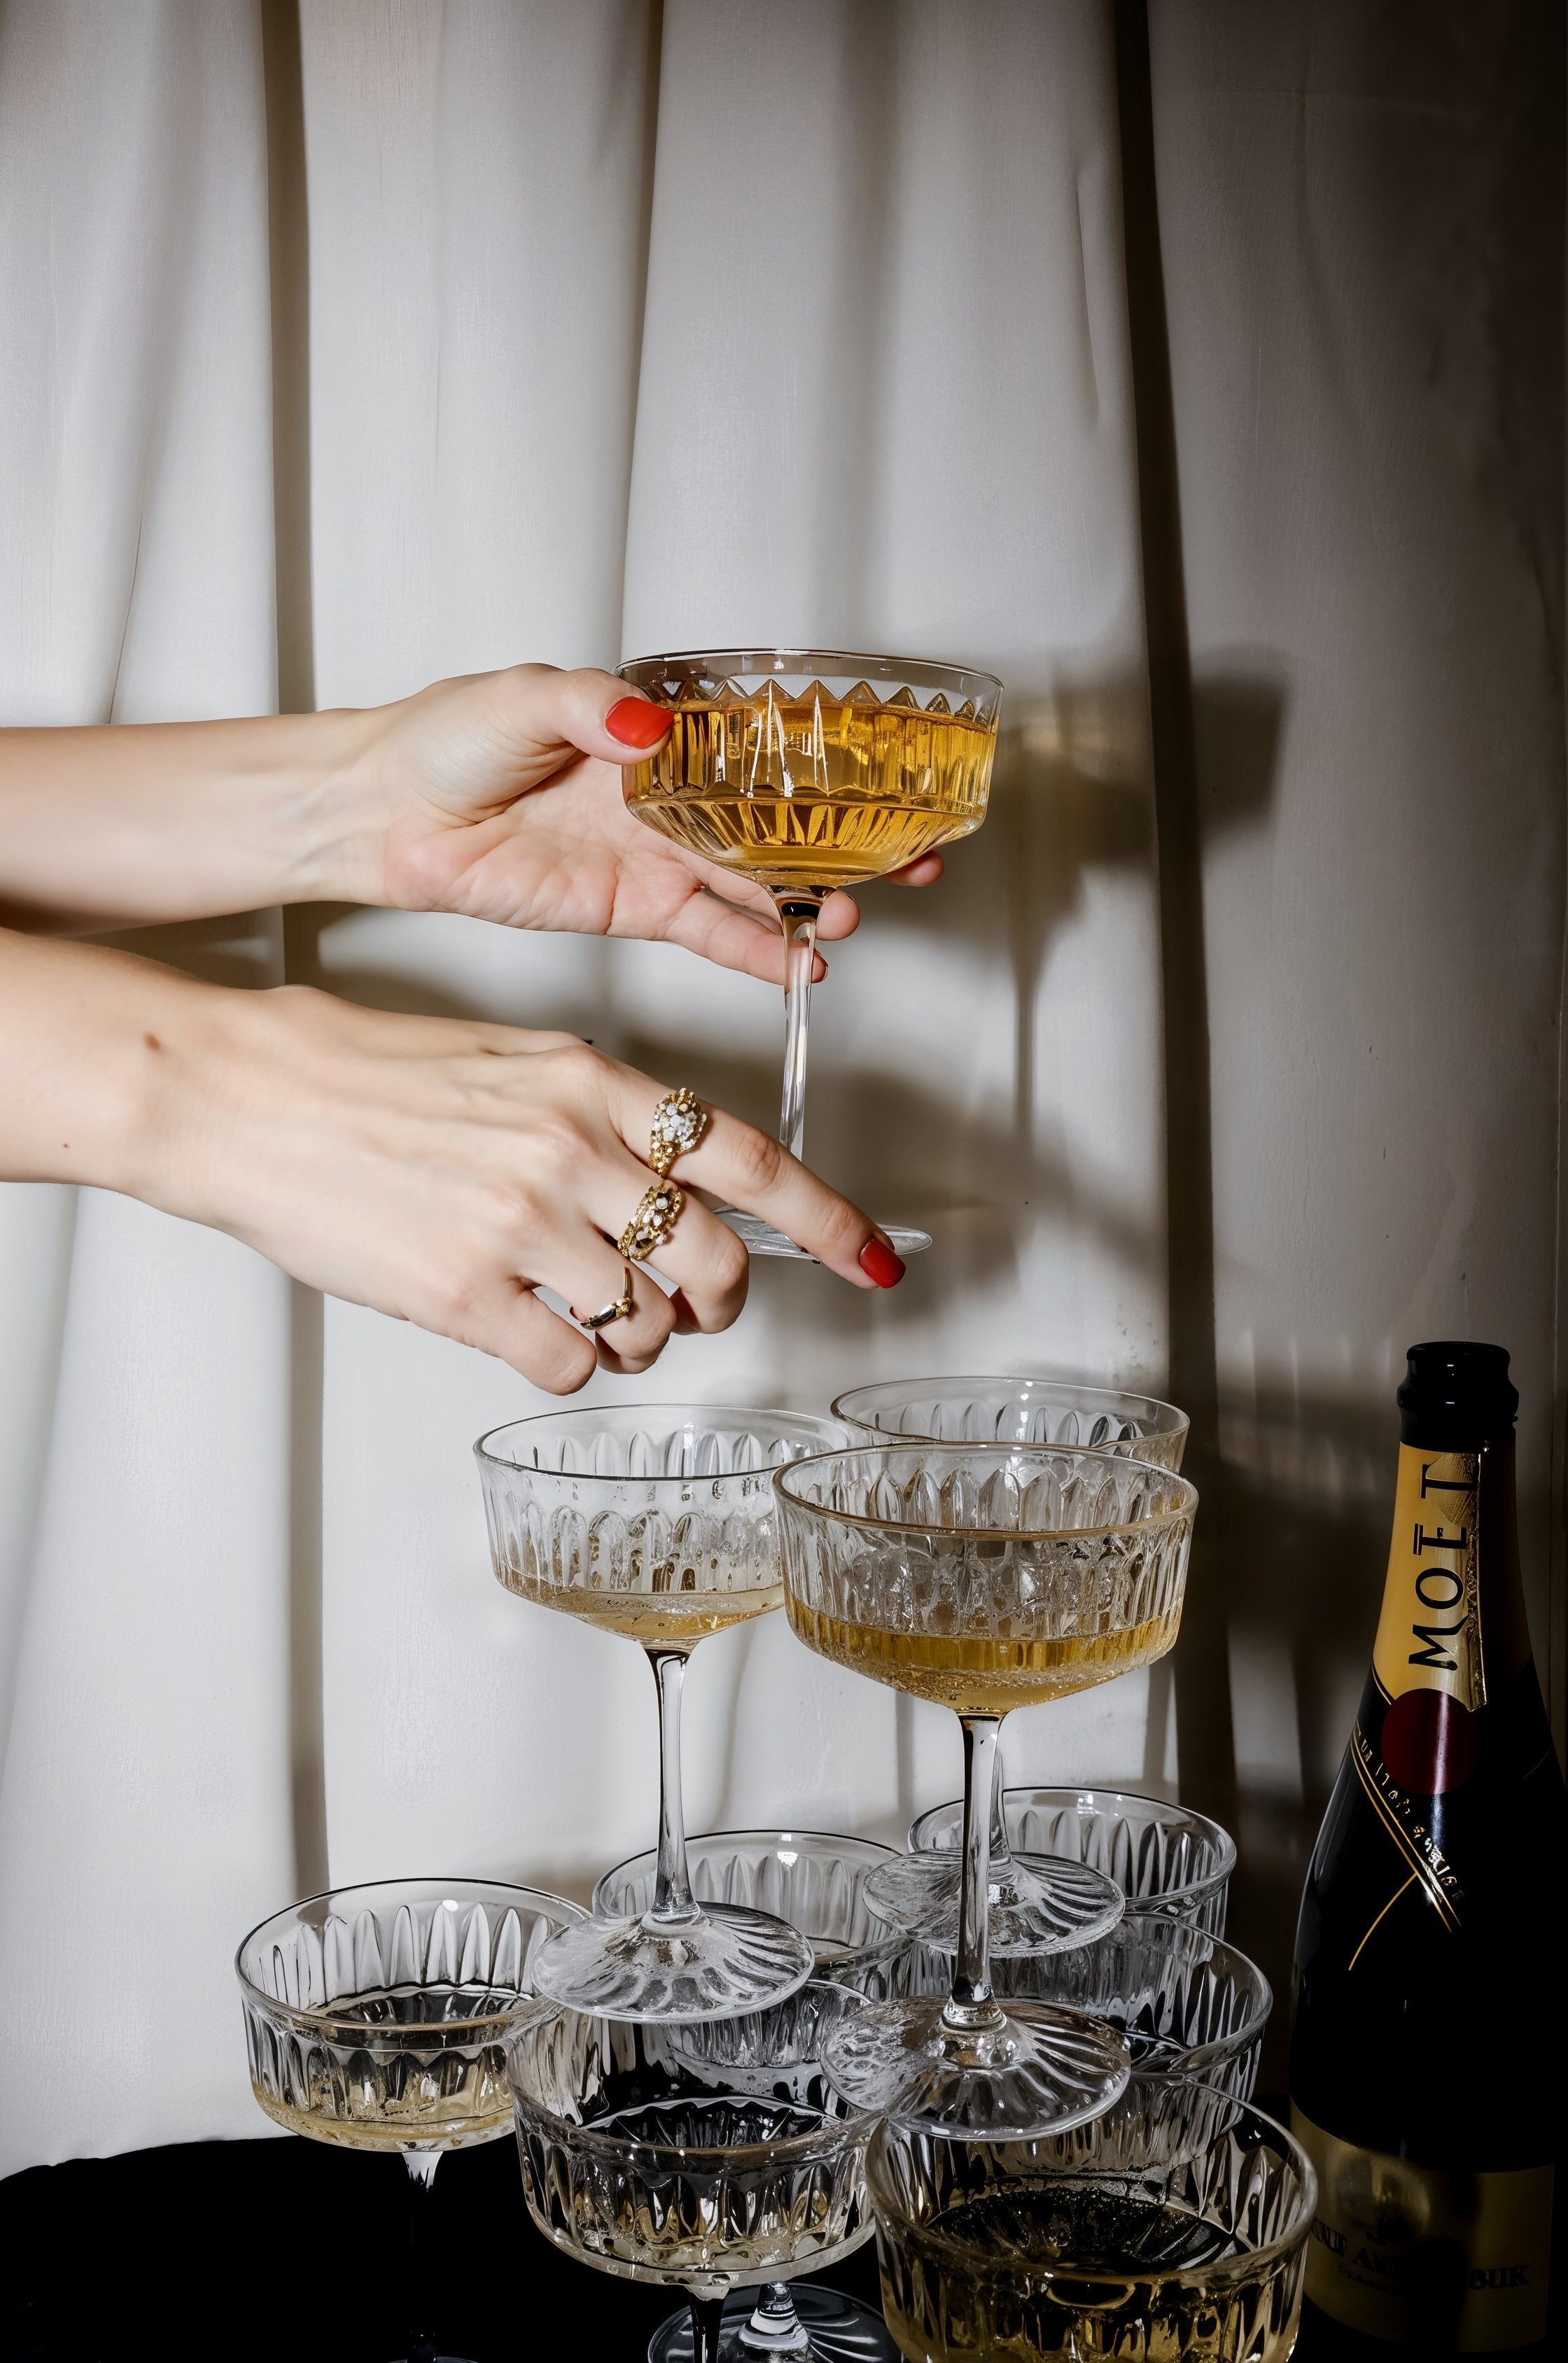 Woman's hands picking up a champagne coupe among a group of freshly poured glasses of champagne